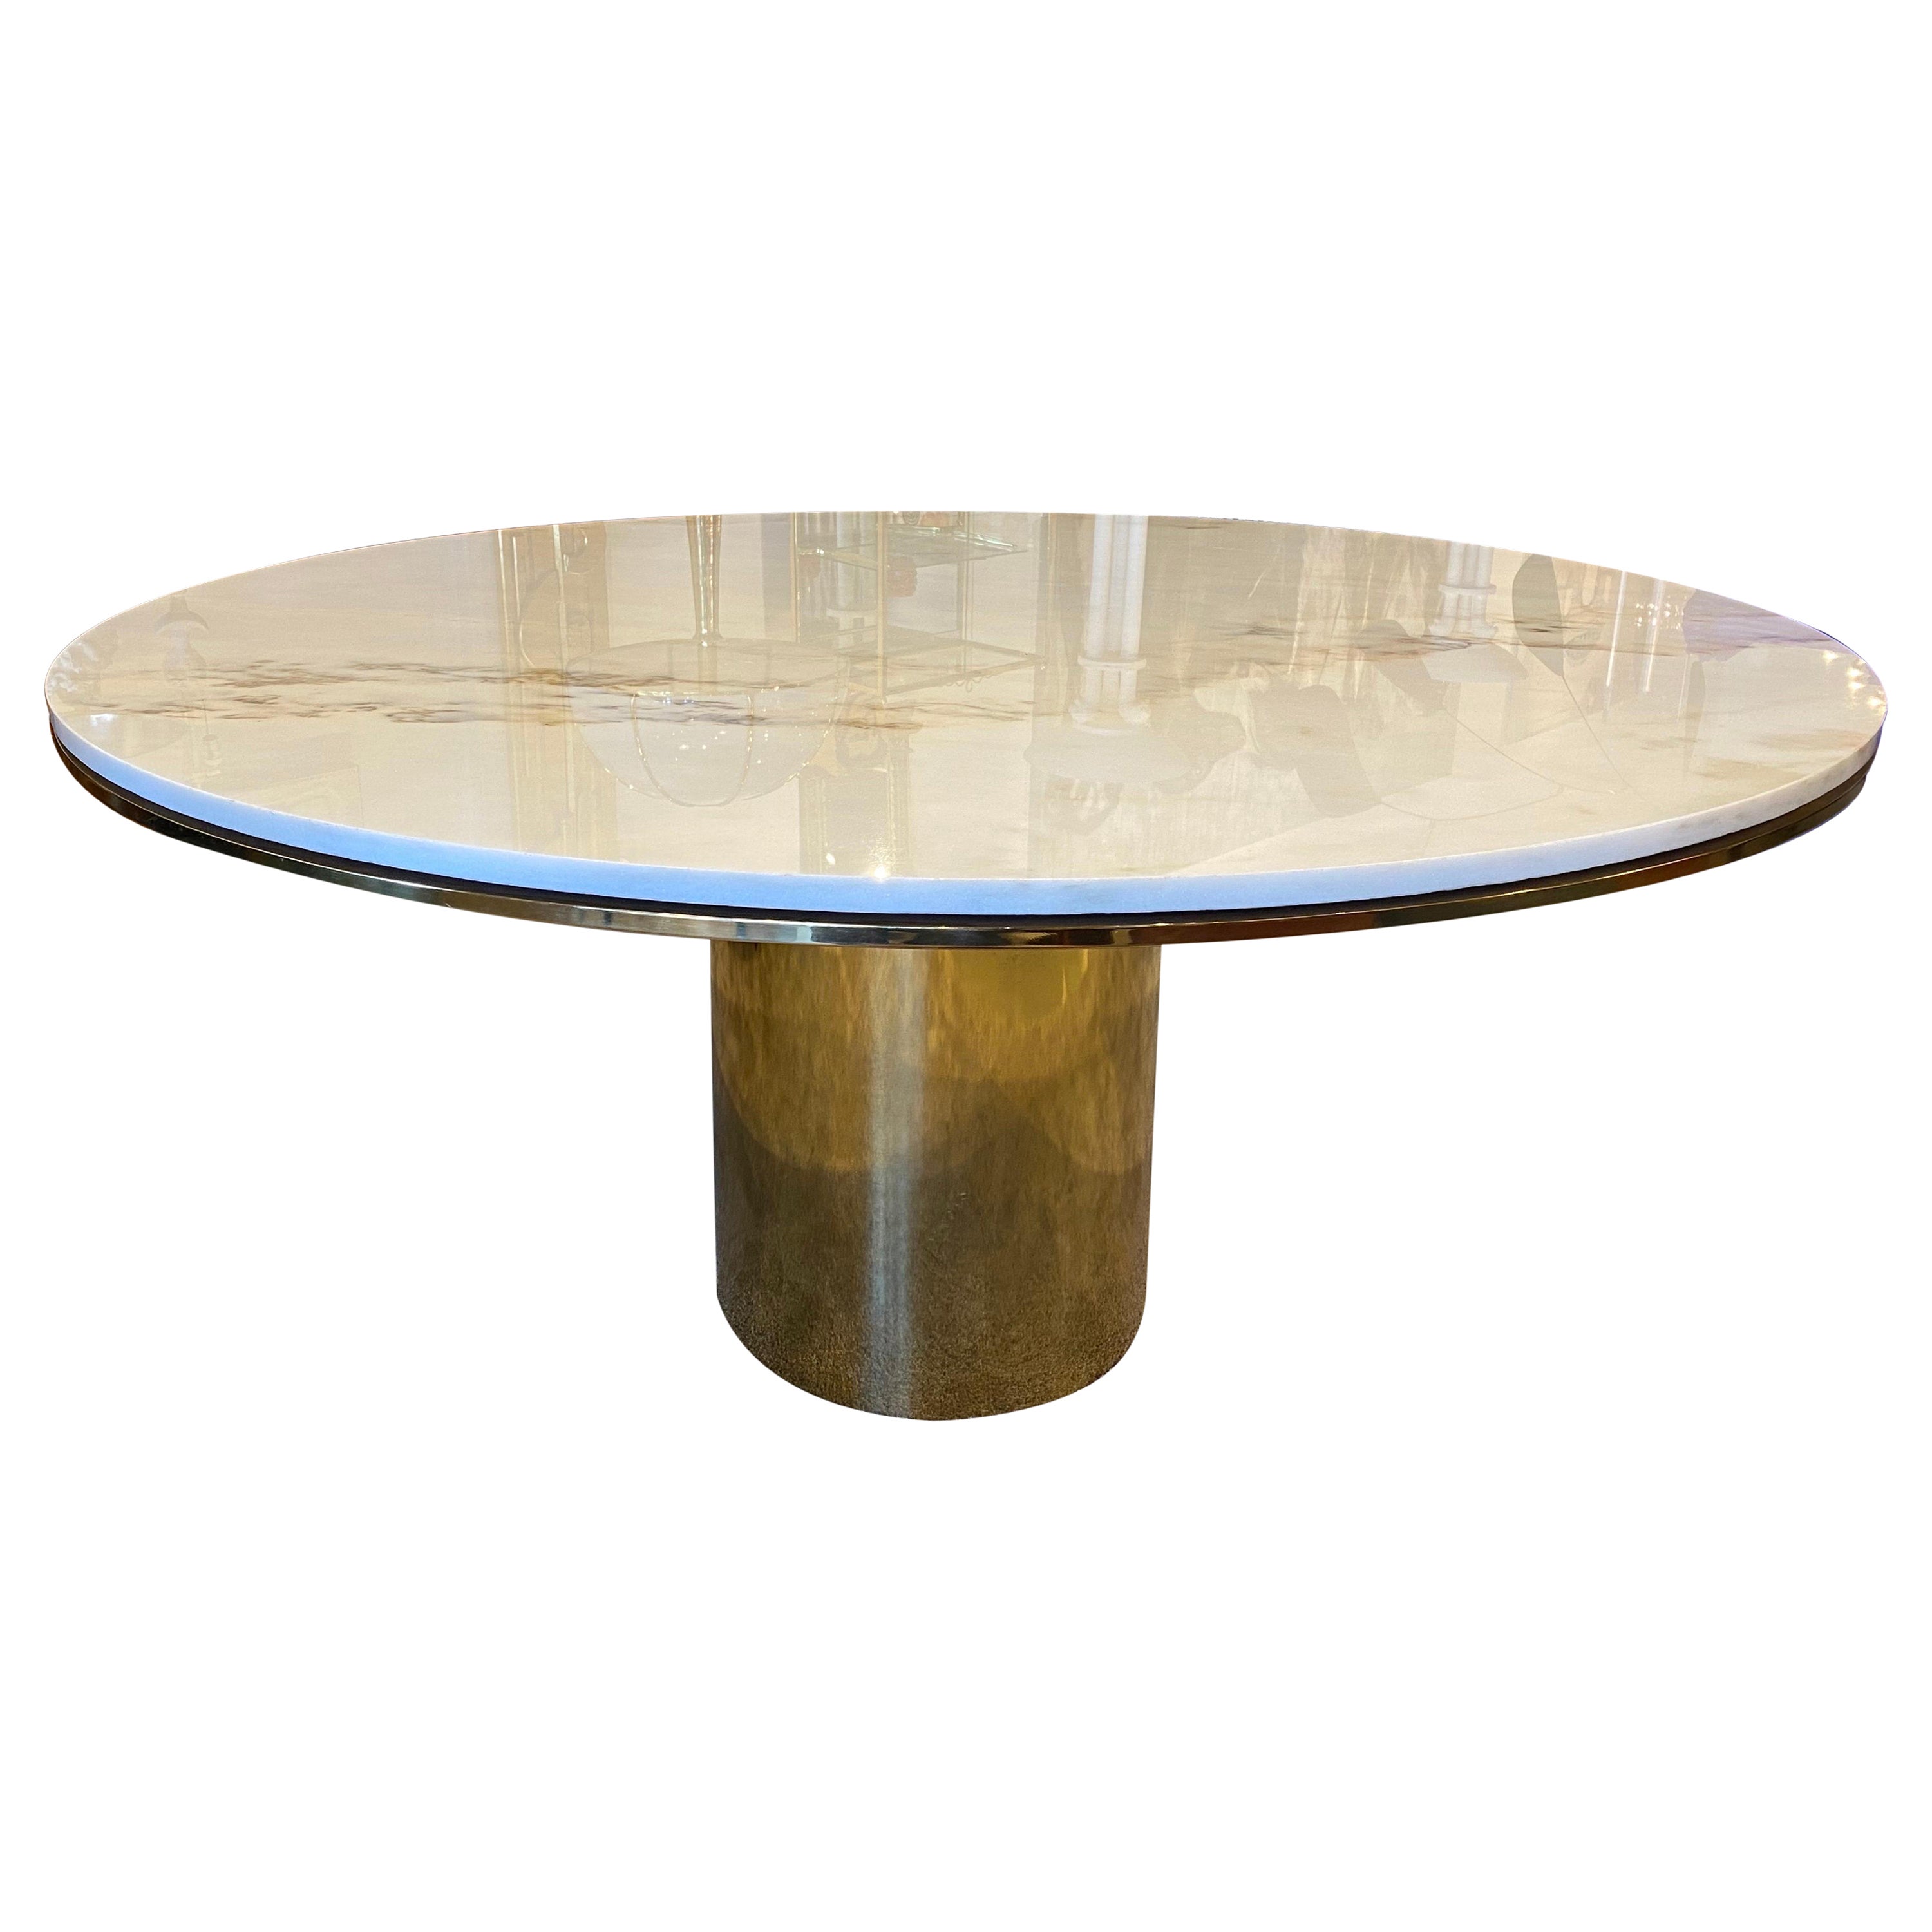 Large Polished Bronze & White Marble Top "Anello" Dining Table by Brueton